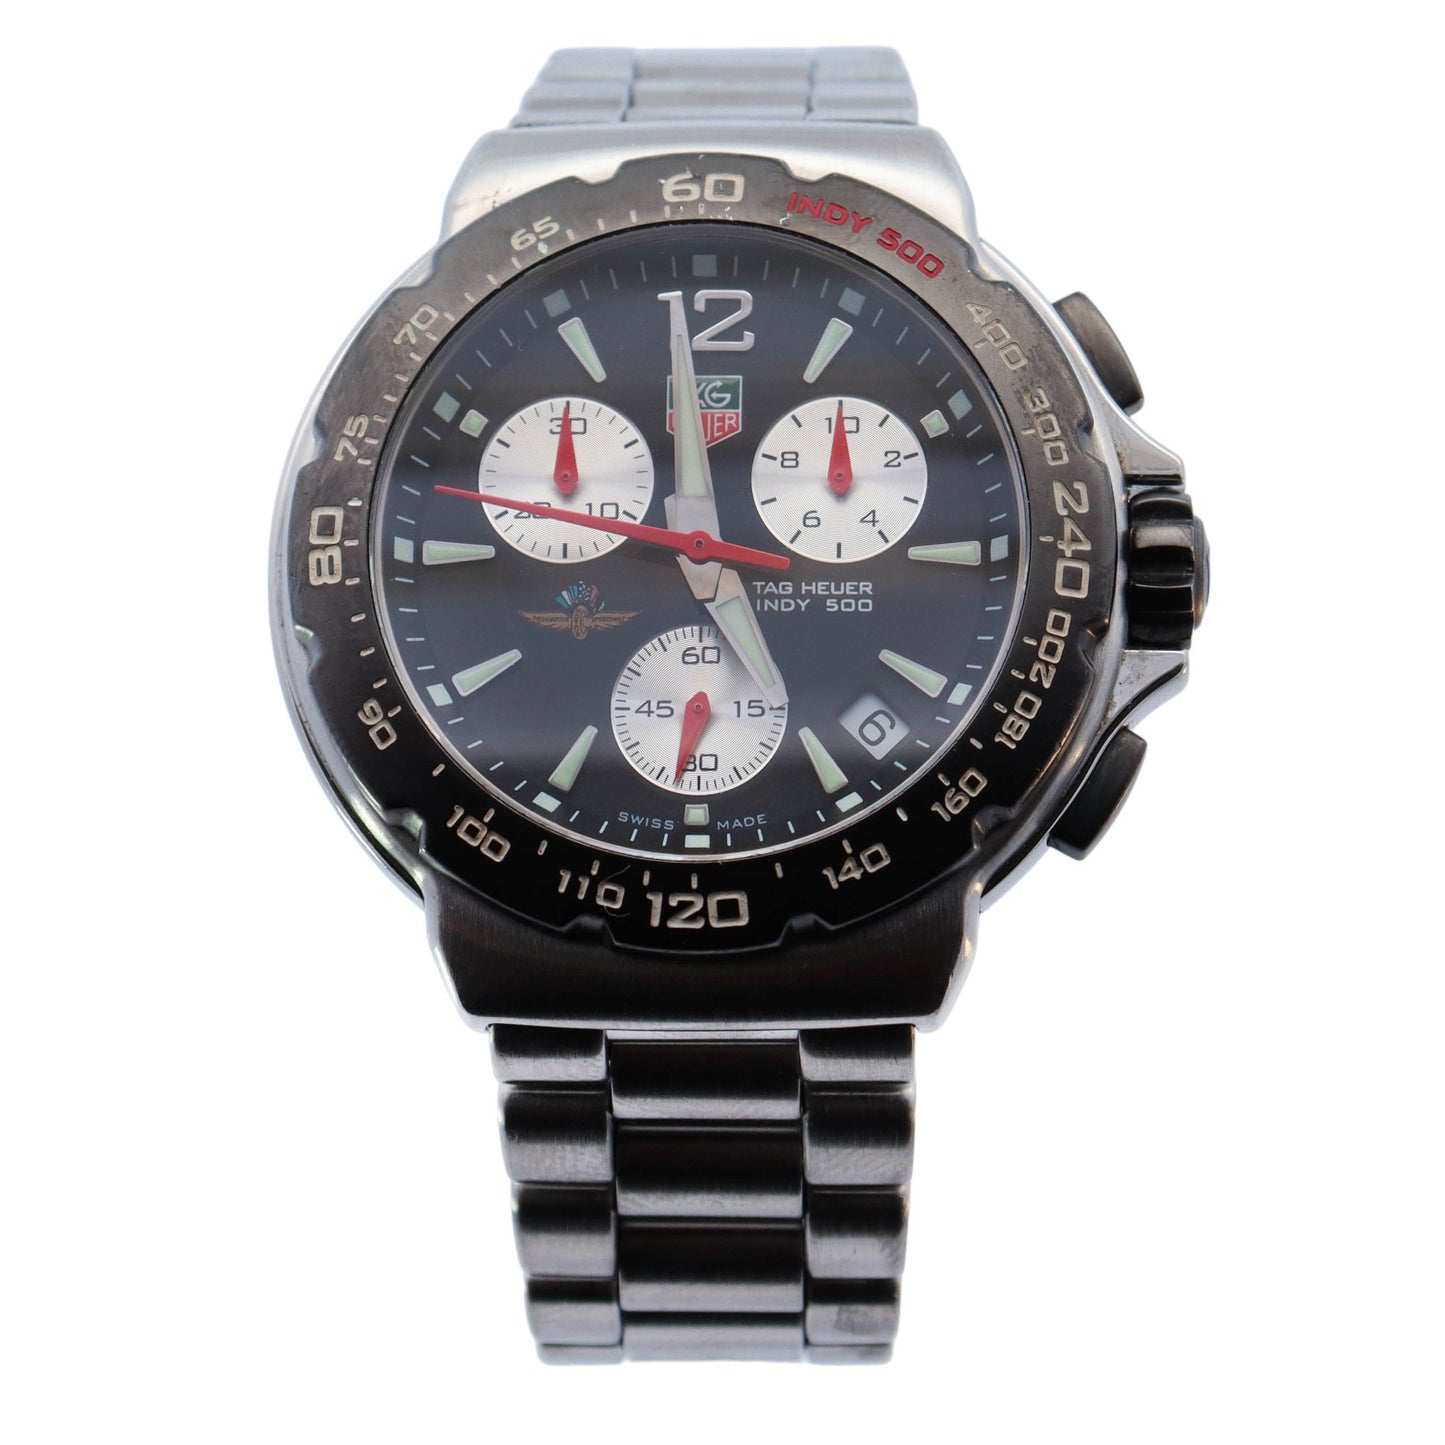 Tag Heuer Formula 1 Quartz Indy 500 Stainless Steel 41mm Black Chronograph Dial Watch Reference# CAC111A.BA0850 - Happy Jewelers Fine Jewelry Lifetime Warranty